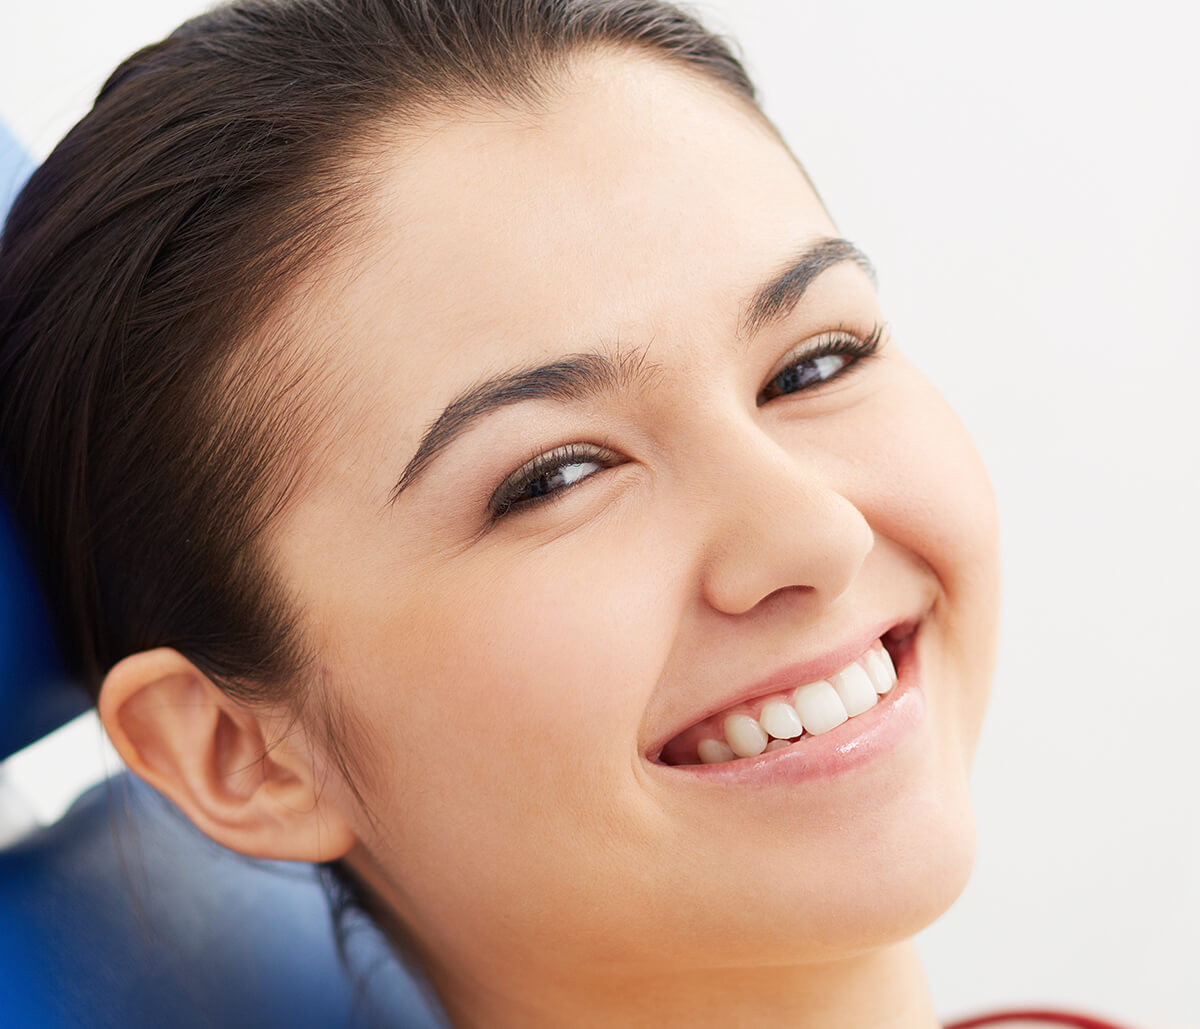 Are Dental Implants the solution to your missing teeth?